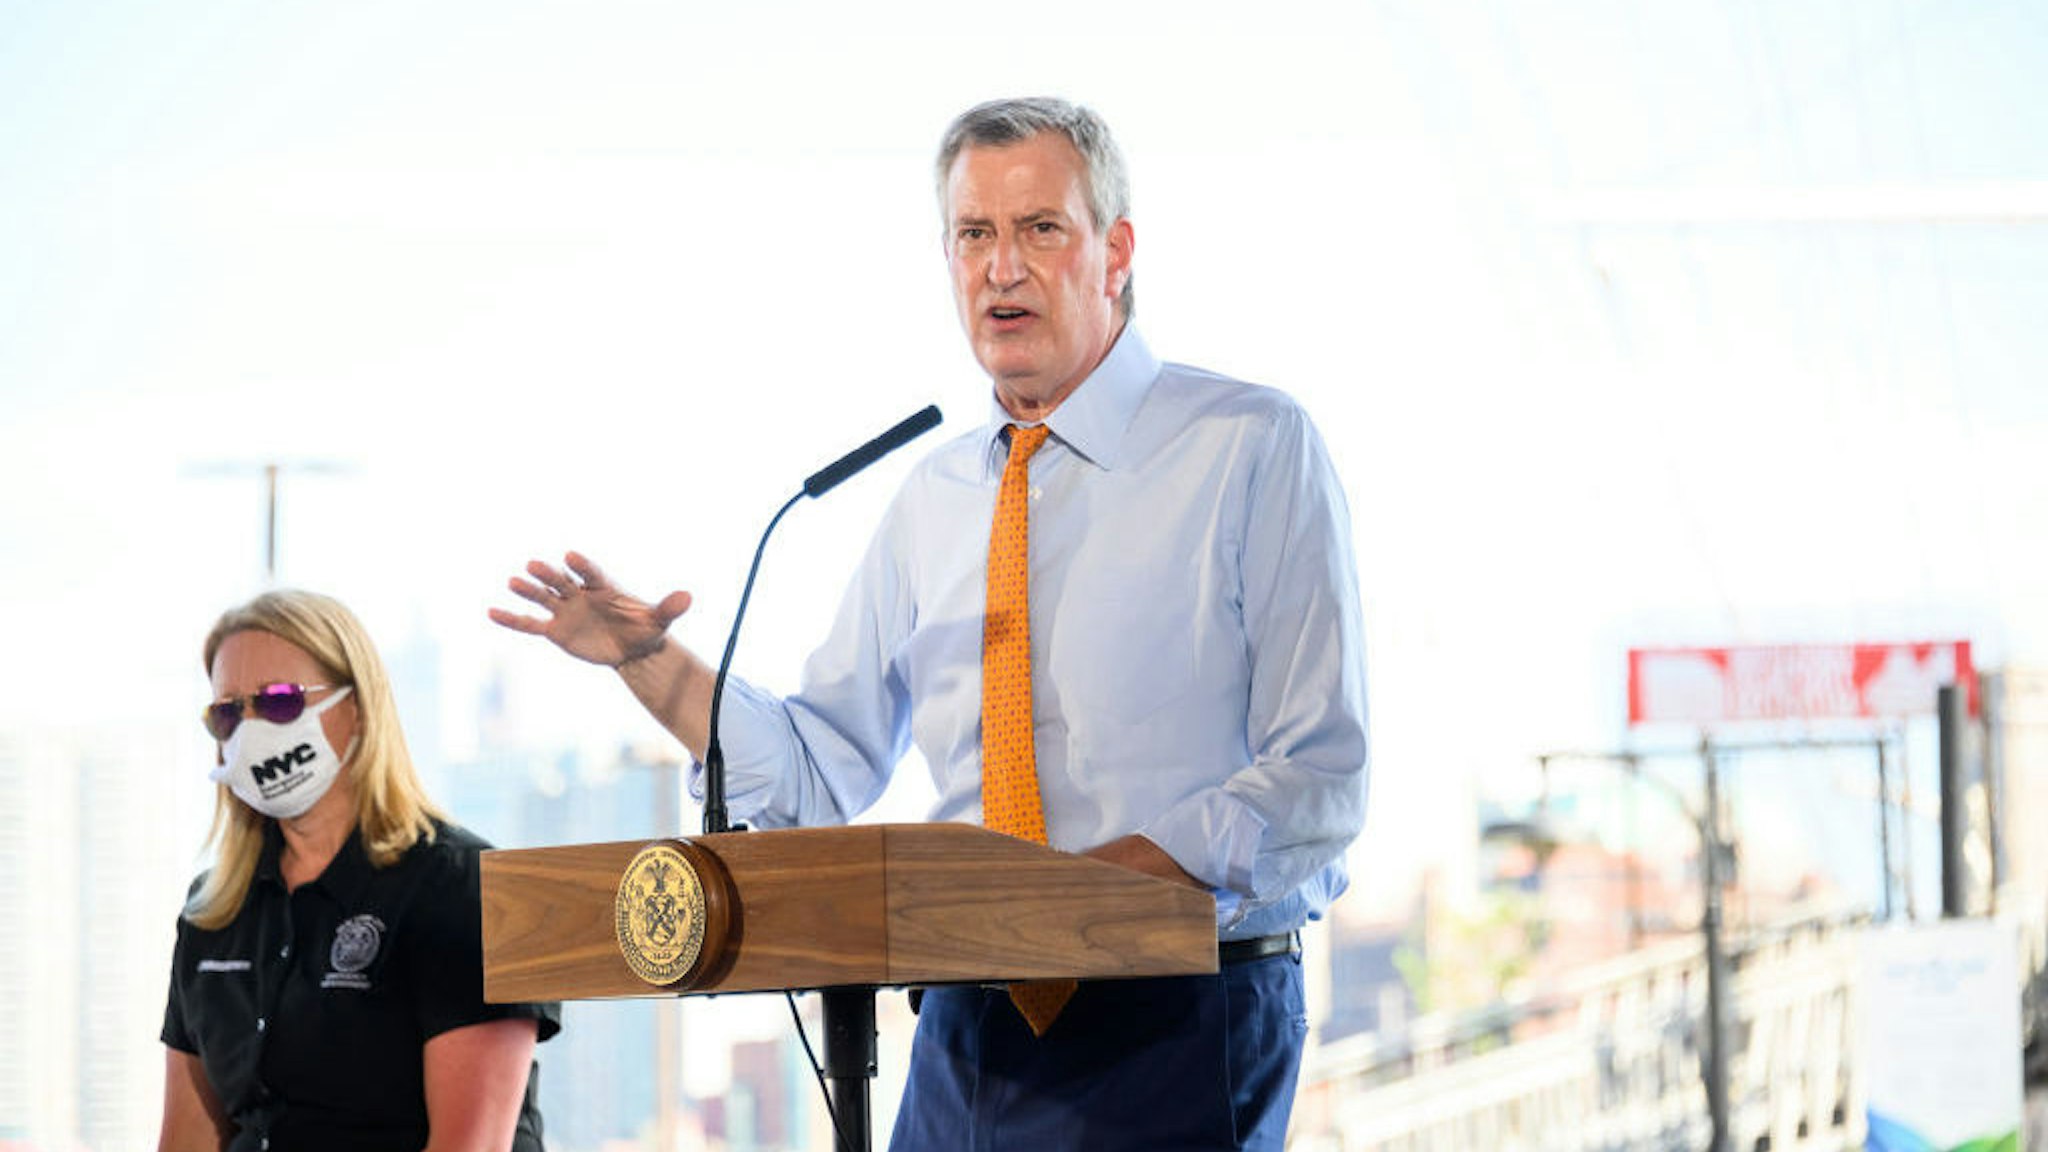 NEW YORK, NEW YORK - AUGUST 03: New York City Mayor Bill de Blasio speaks at South Street Seaport as workers erect temporary flood barriers in preparation for potential flooding and a storm surge from Tropical Storm Isaias on August 03, 2020 in New York City. The storm, which is heading up the East Coast packing heavy winds, is expected to dump several inches of rain on the metro area starting late this evening and into tomorrow. The interlocking tubes, called Tiger Dams, are installed in areas that were heavily damaged from flooding during Hurricane Sandy. (Photo by Noam Galai/Getty Images)